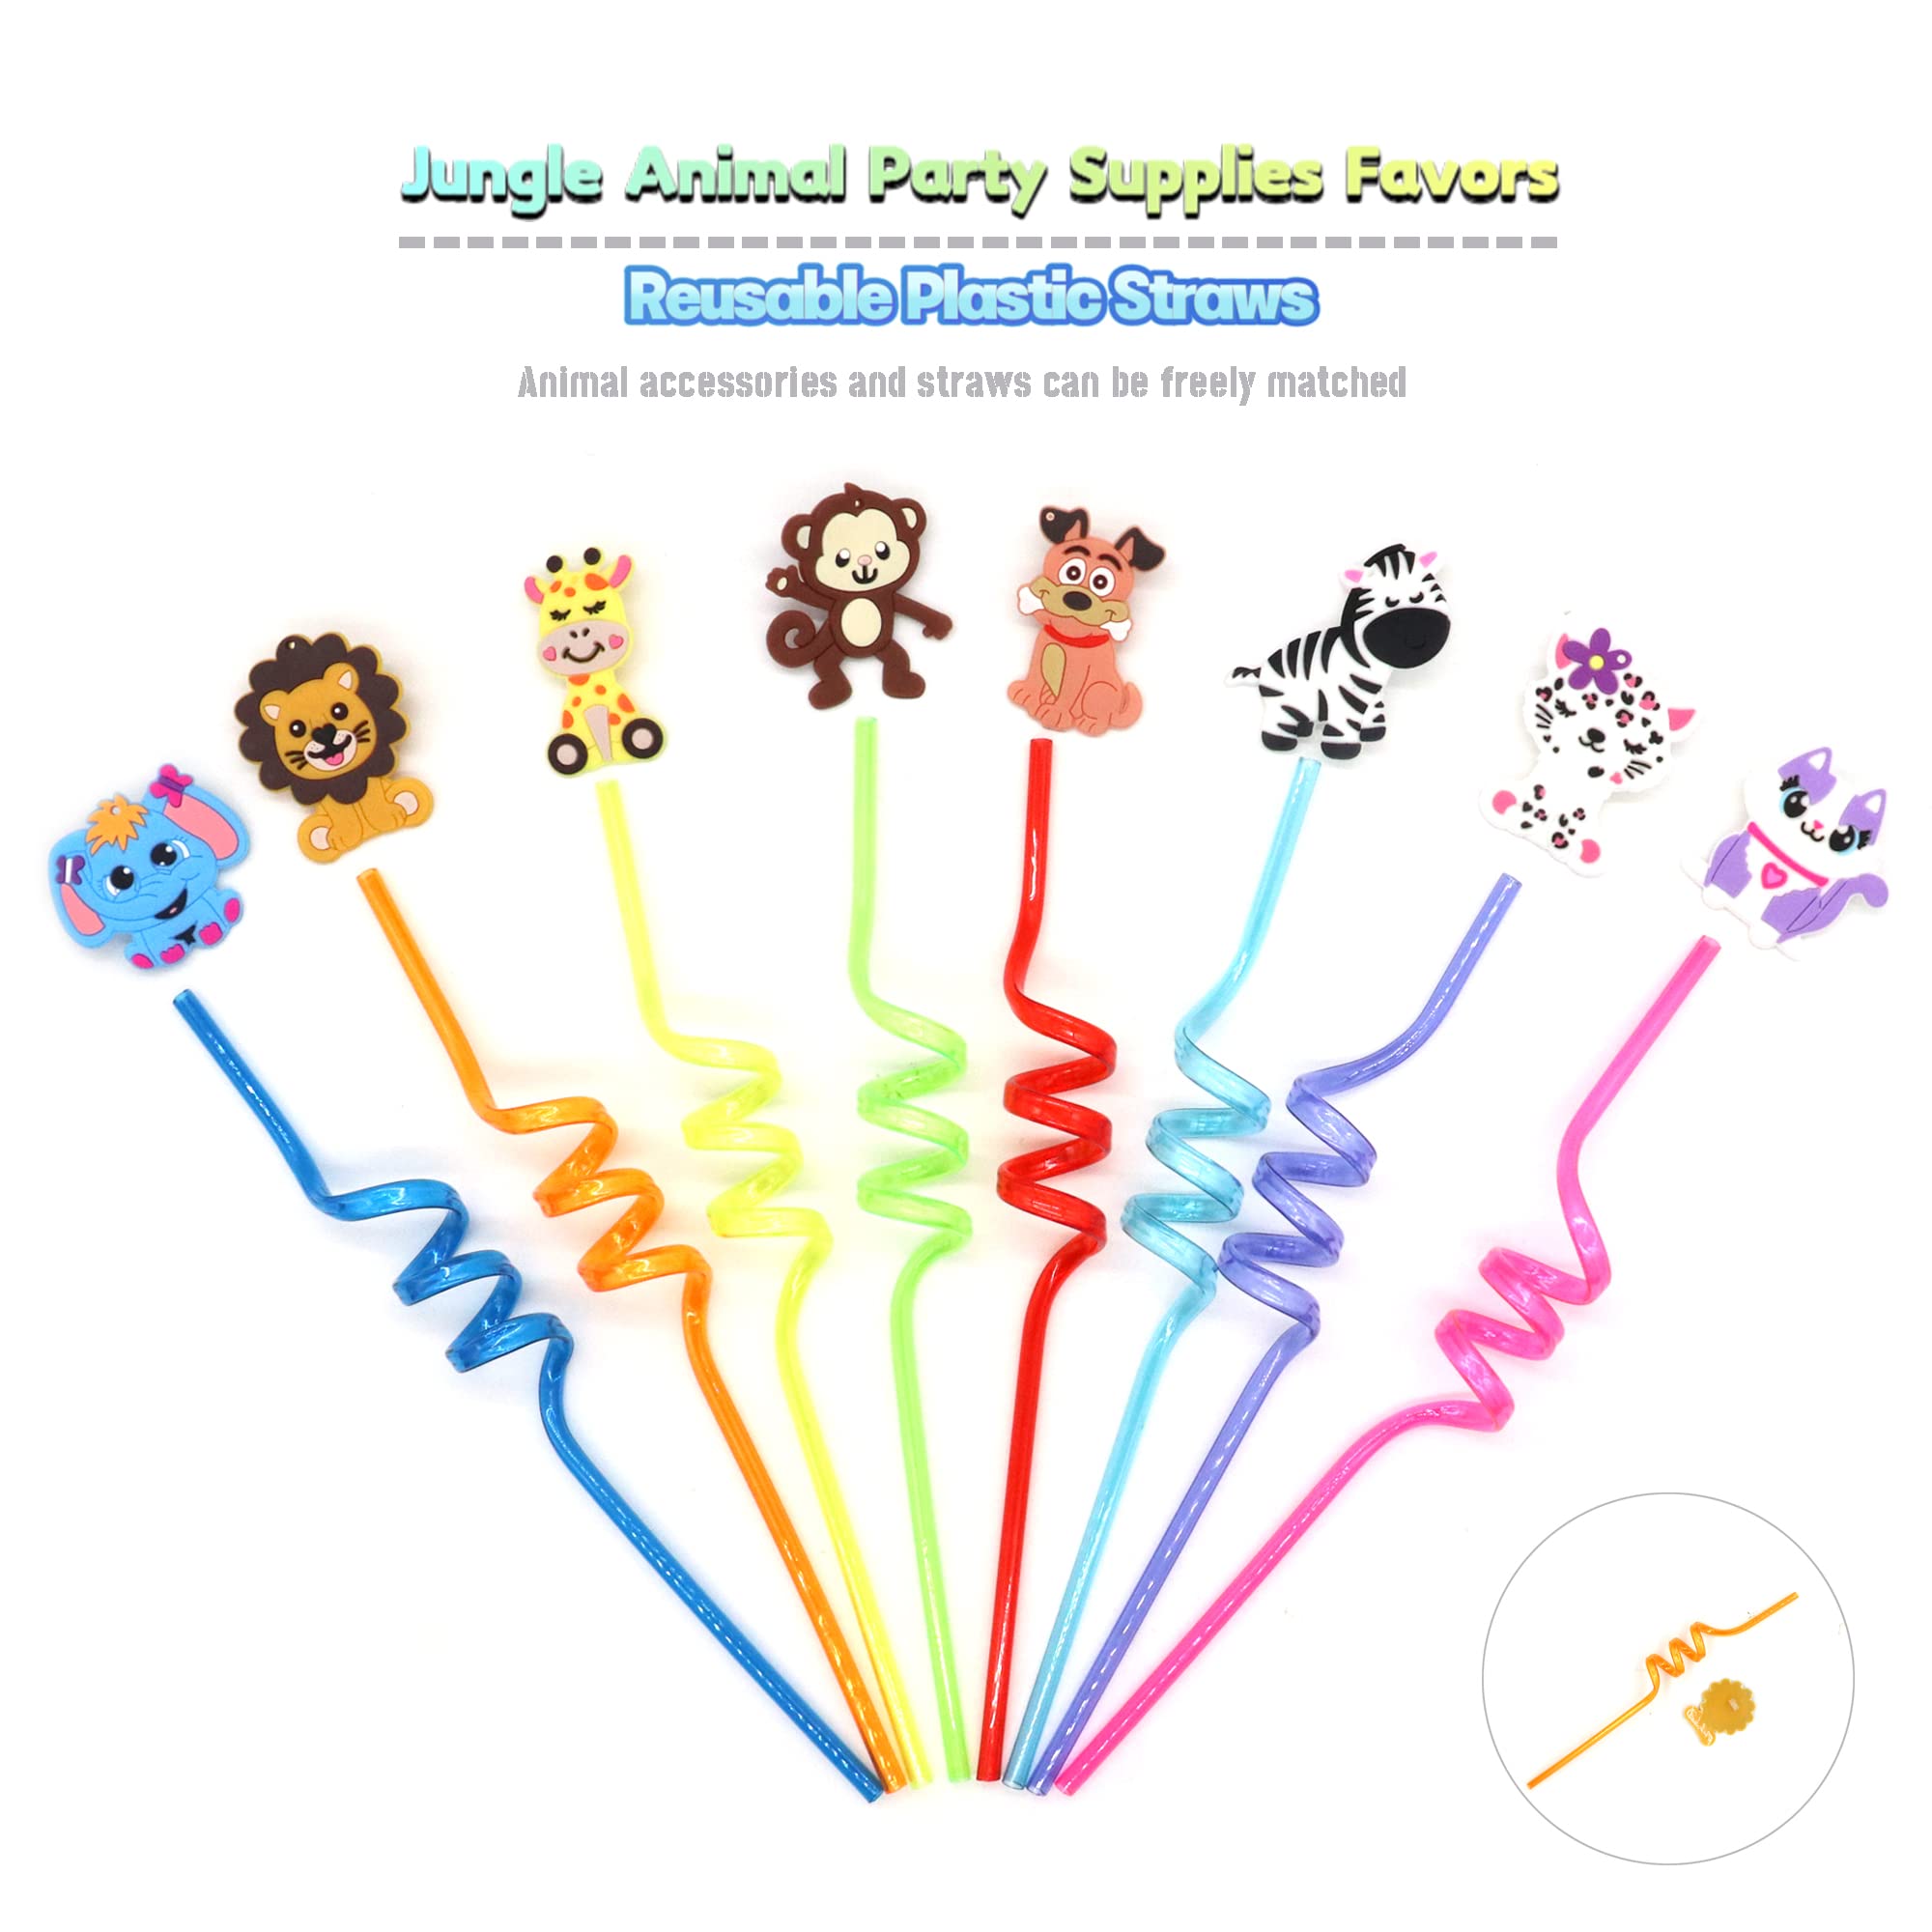 24 Reusable Jungle Animal Plastic Straws for Lion Fox Zebra Giraffe Safari Birthday Party Supplies Favors,Woodland Animal Birthady Party Decorations Straws with 4 Cleaning Brushes